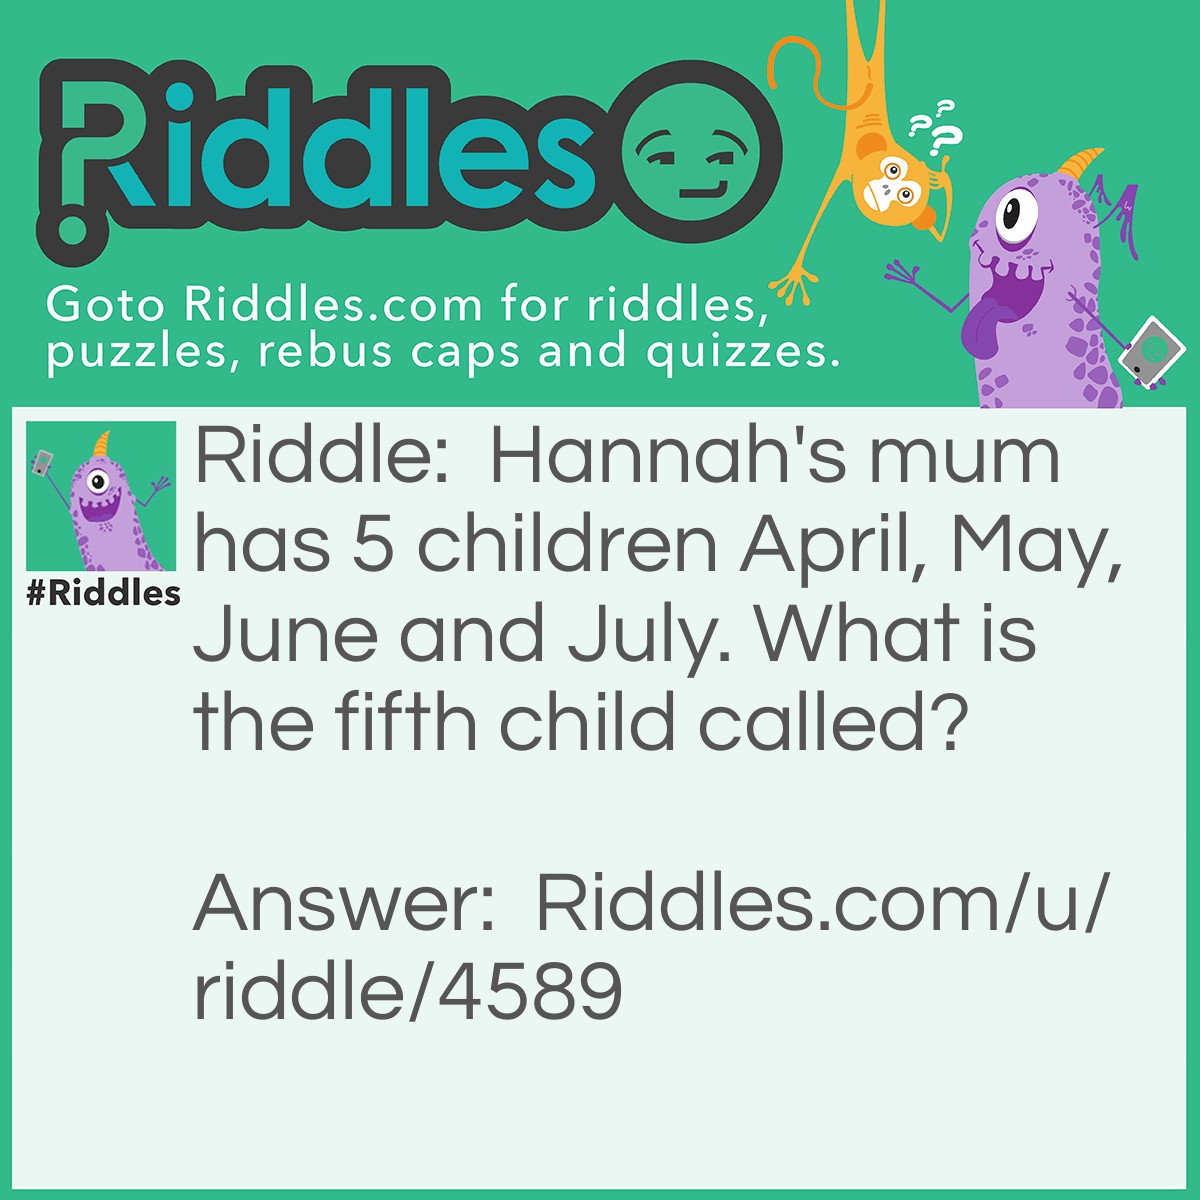 Riddle: Hannah's mum has 5 children April, May, June and July. What is the fifth child called? Answer: Hannah.